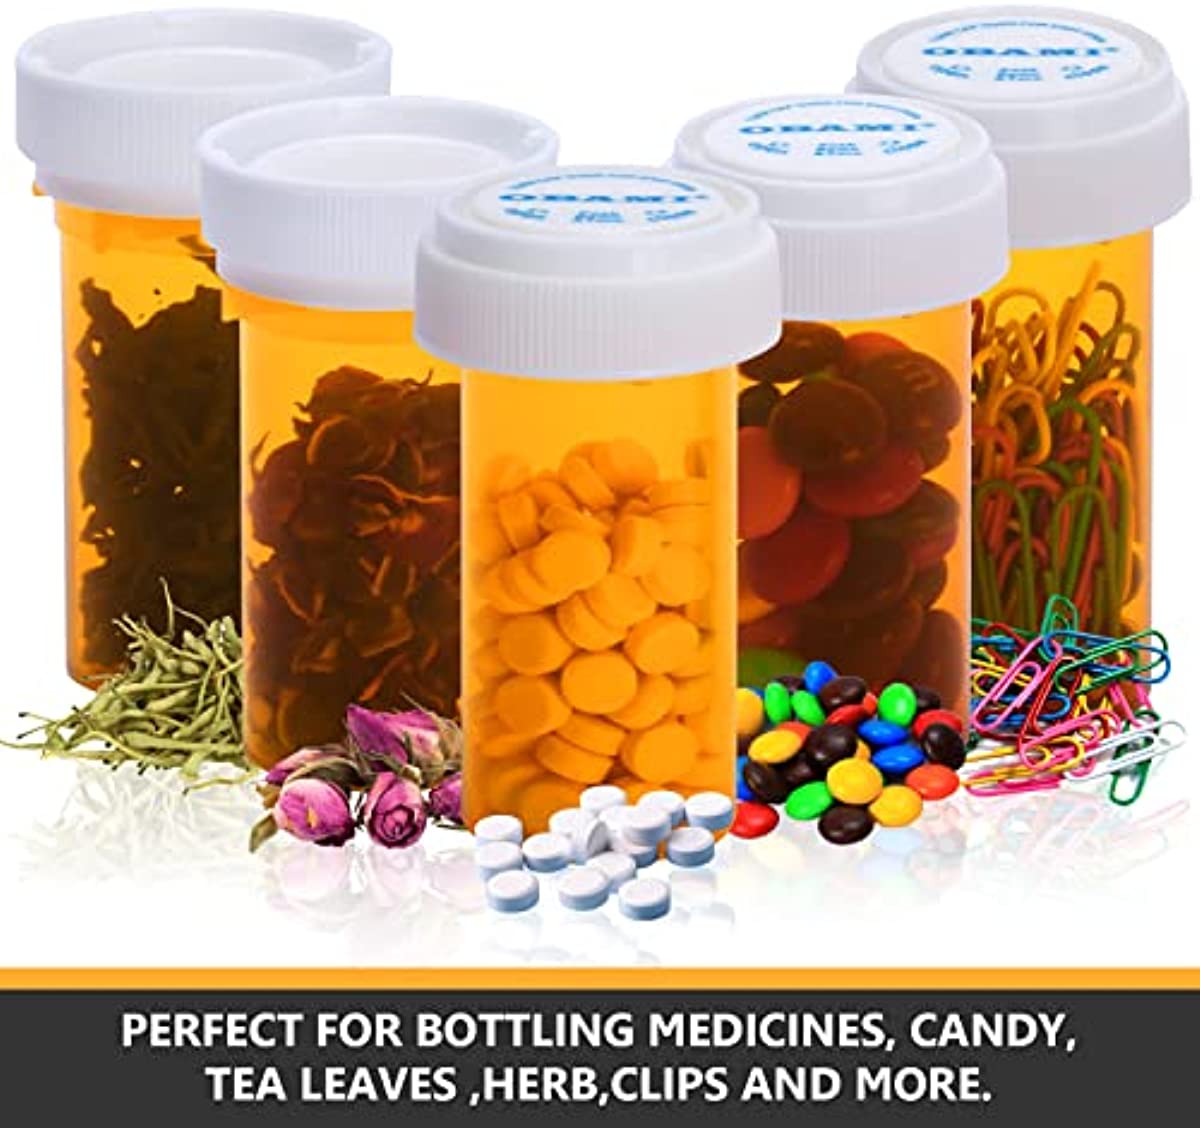 Plastic Empty Pill Bottles with Double Sided Use (Child Resistant & Easy Open) Caps - Medicine Container Pill Cases Dispenser Organizers (13 Dram, 12pcs)